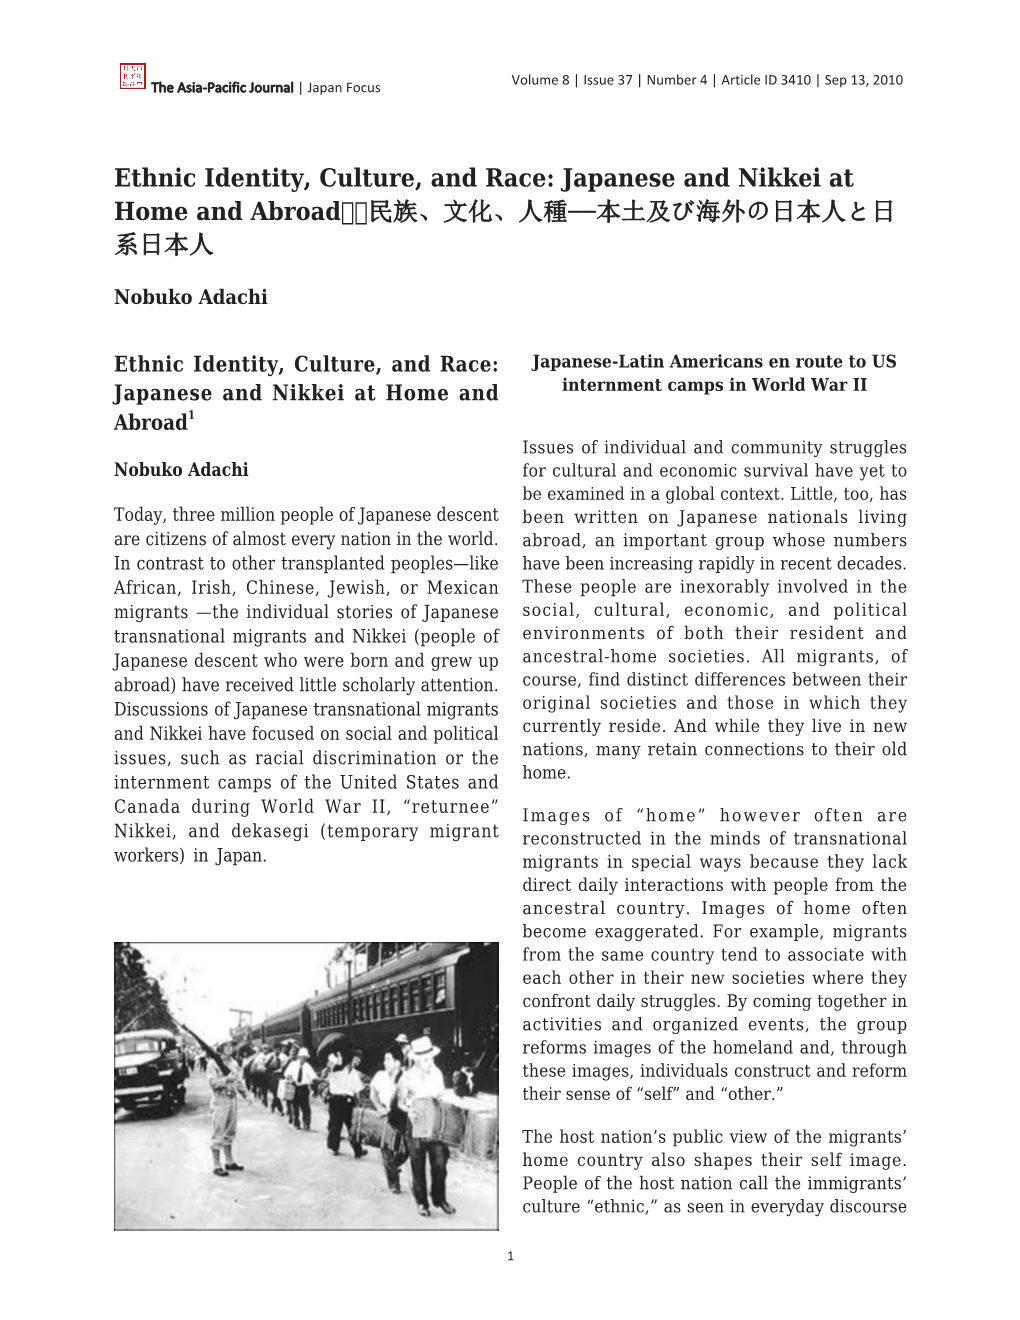 Ethnic Identity, Culture, and Race: Japanese and Nikkei at Home and Abroad 民族、文化、人種−−本土及び海外の日本人と日 系日本人